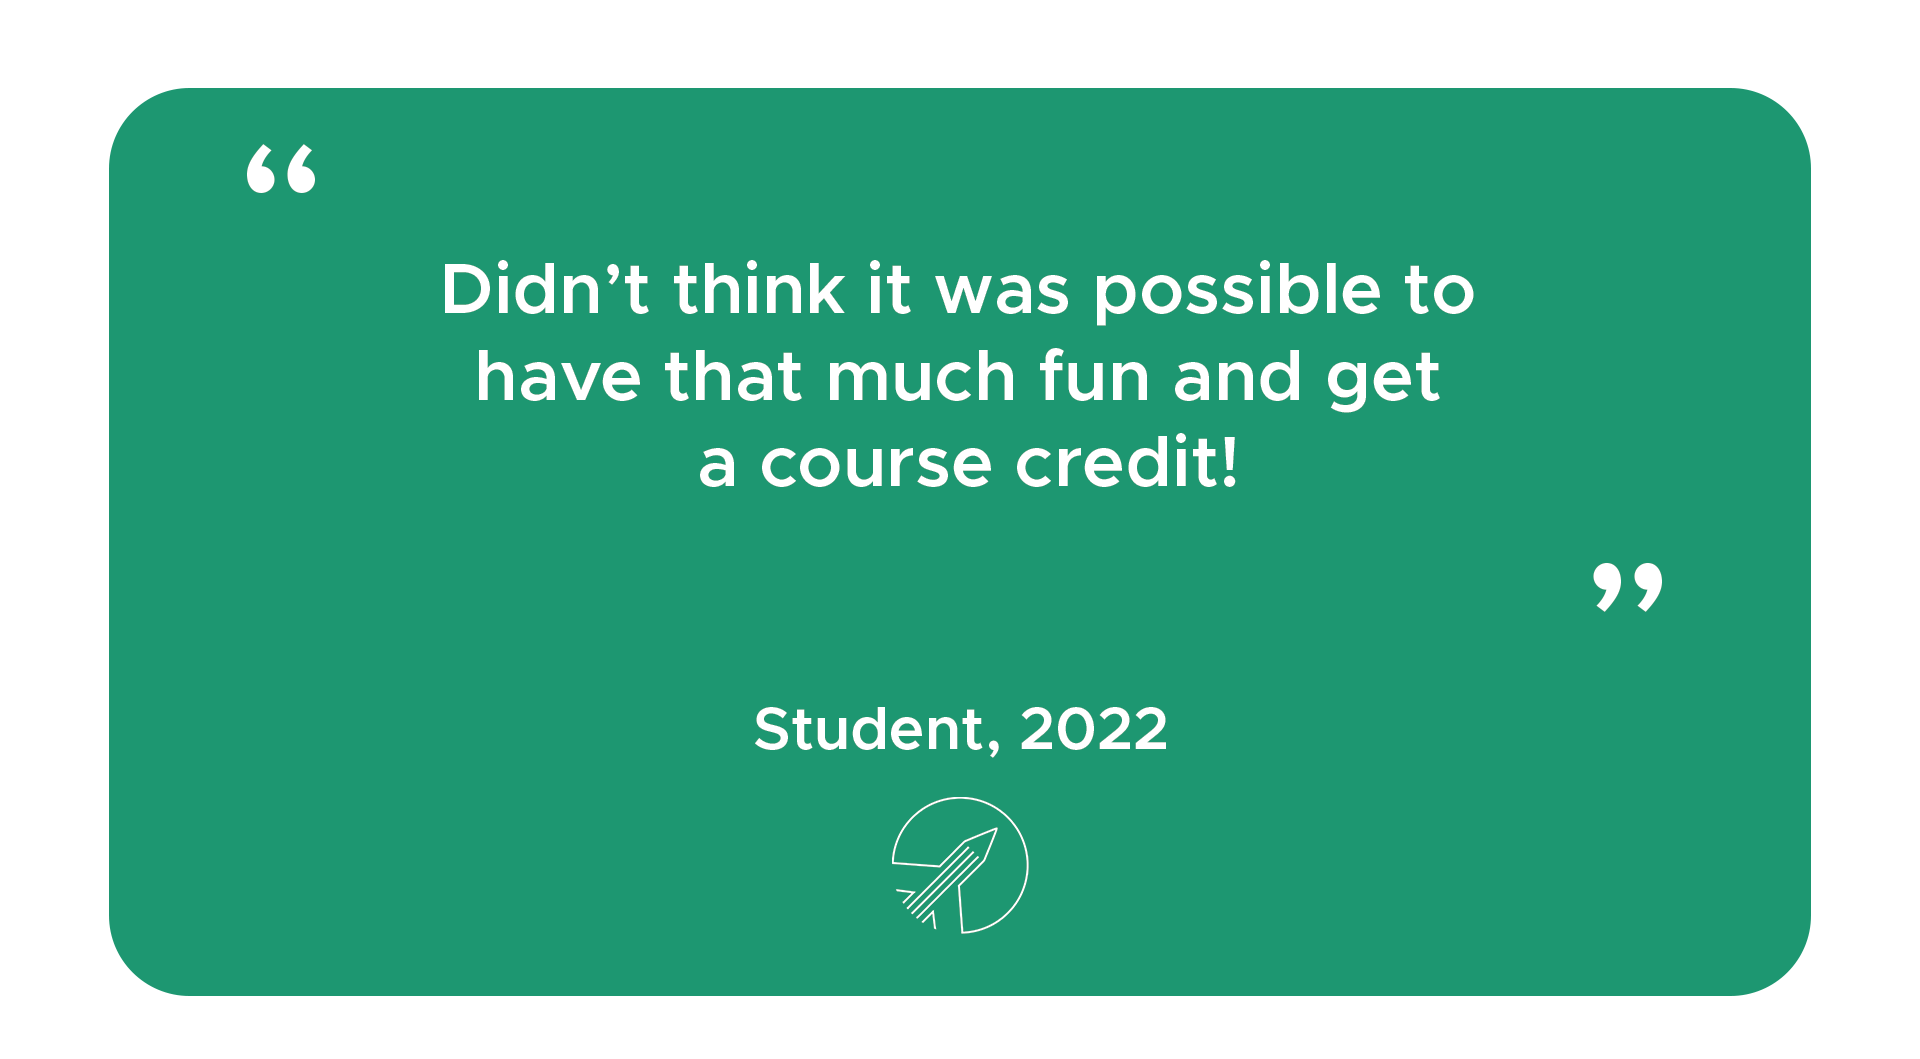 "Didn't think it was possible to have that much fun and get a course credit!" - Student, 2022